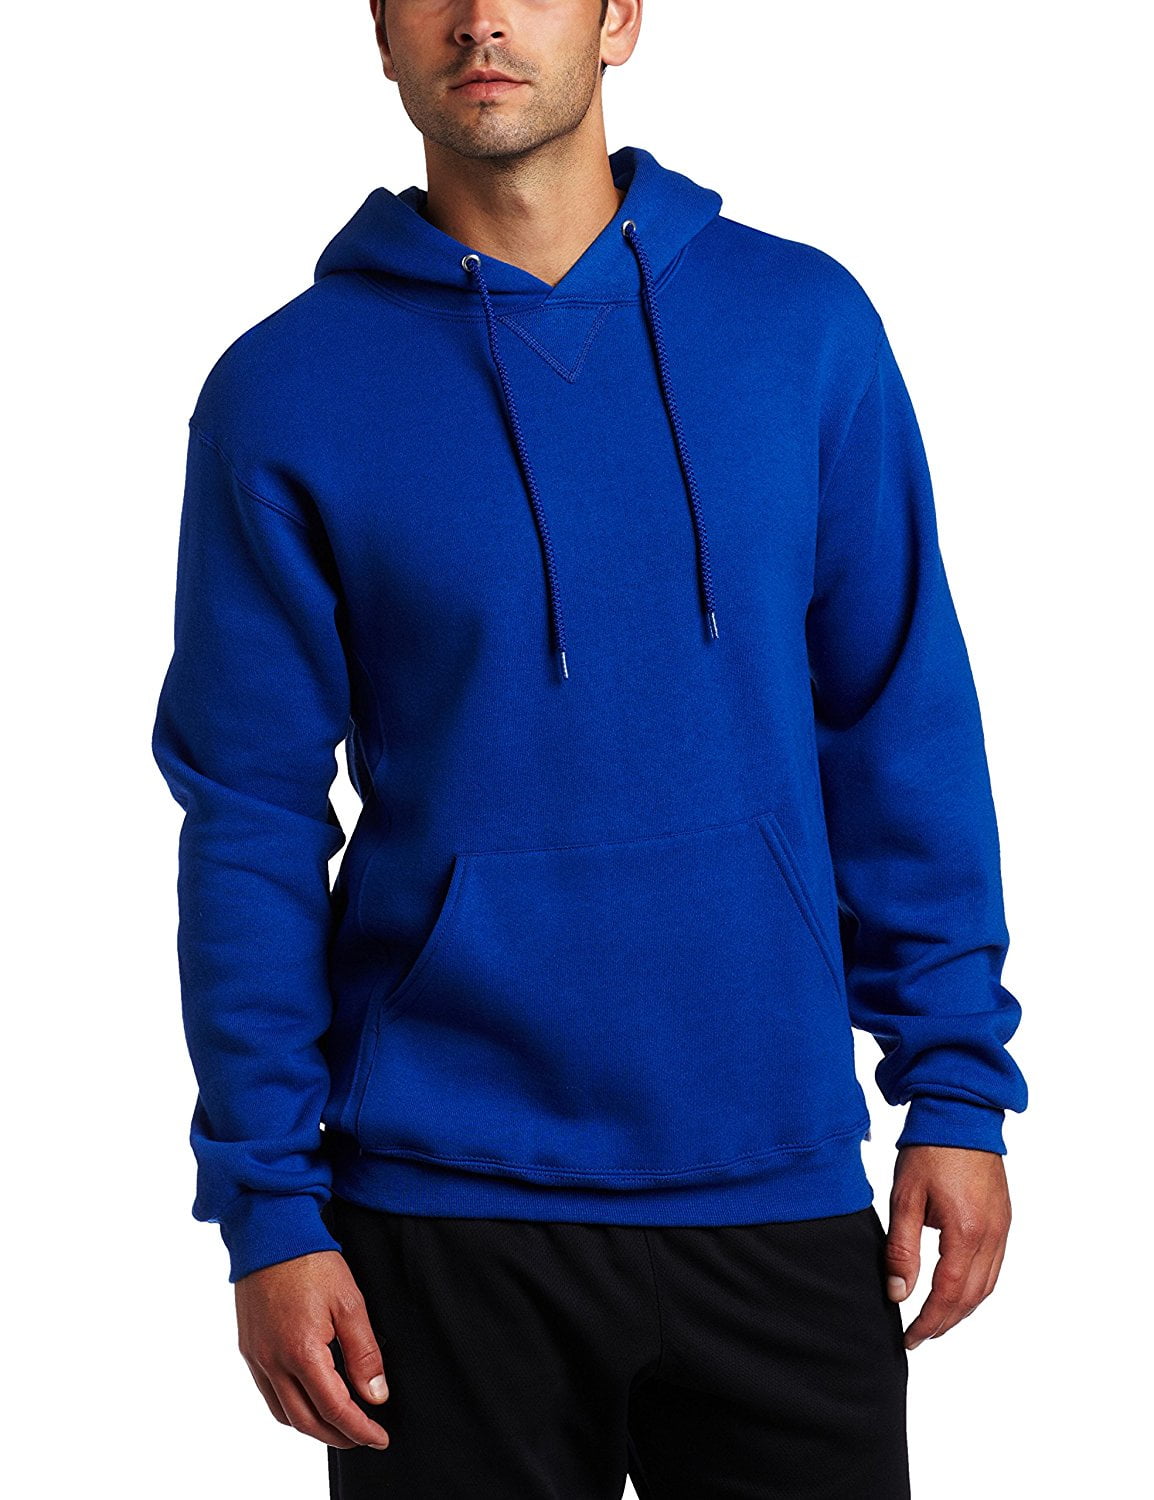 Russell Athletic - Russell Athletic - Men's Dri Power Hooded Pullover ...